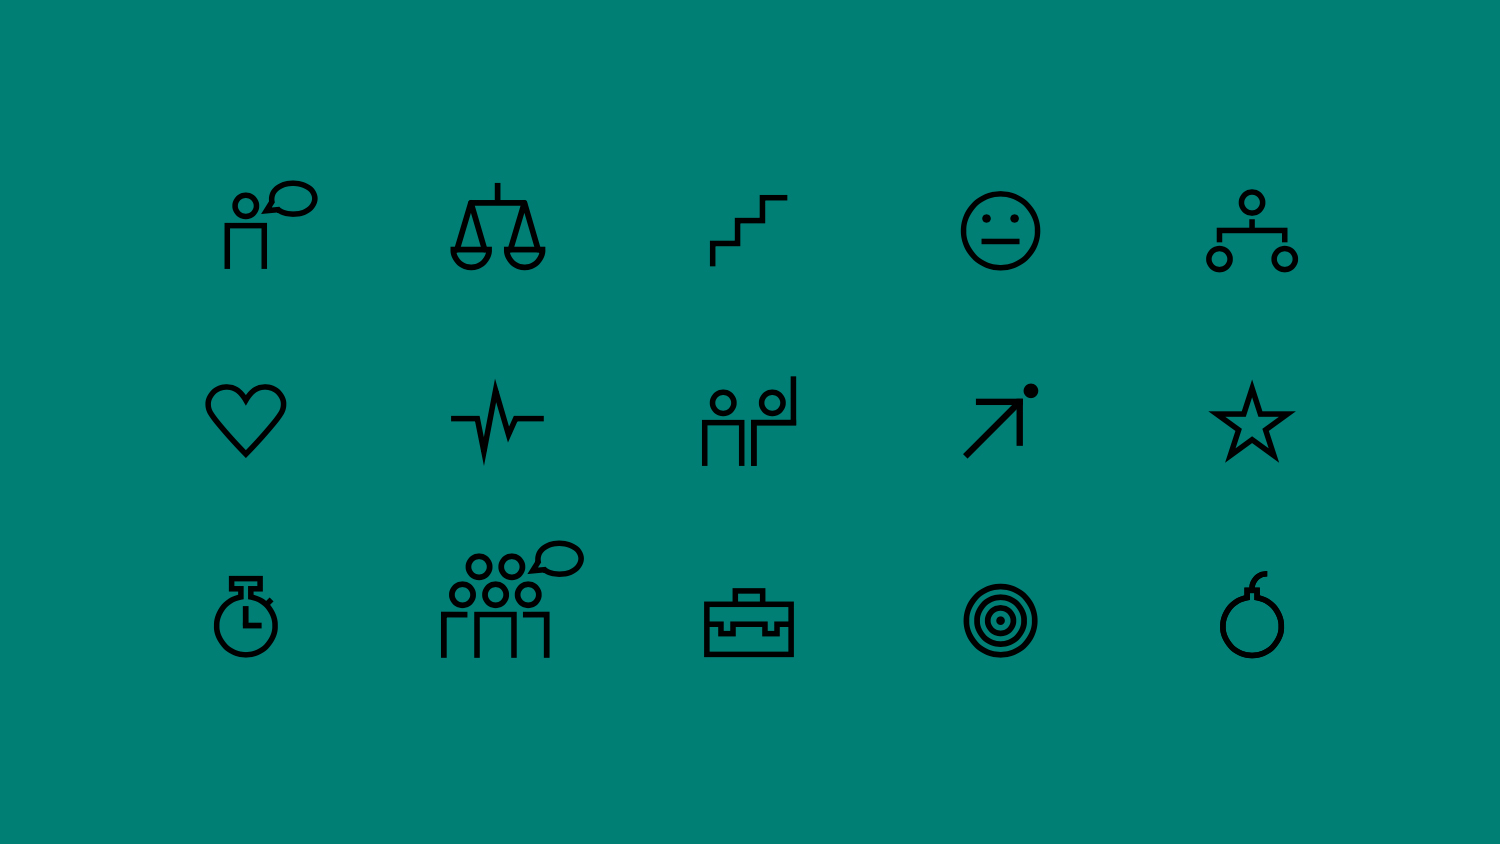 Logotype, pictograms, stationery and website by The Studio for Swedish customer survey specialists Brilliant